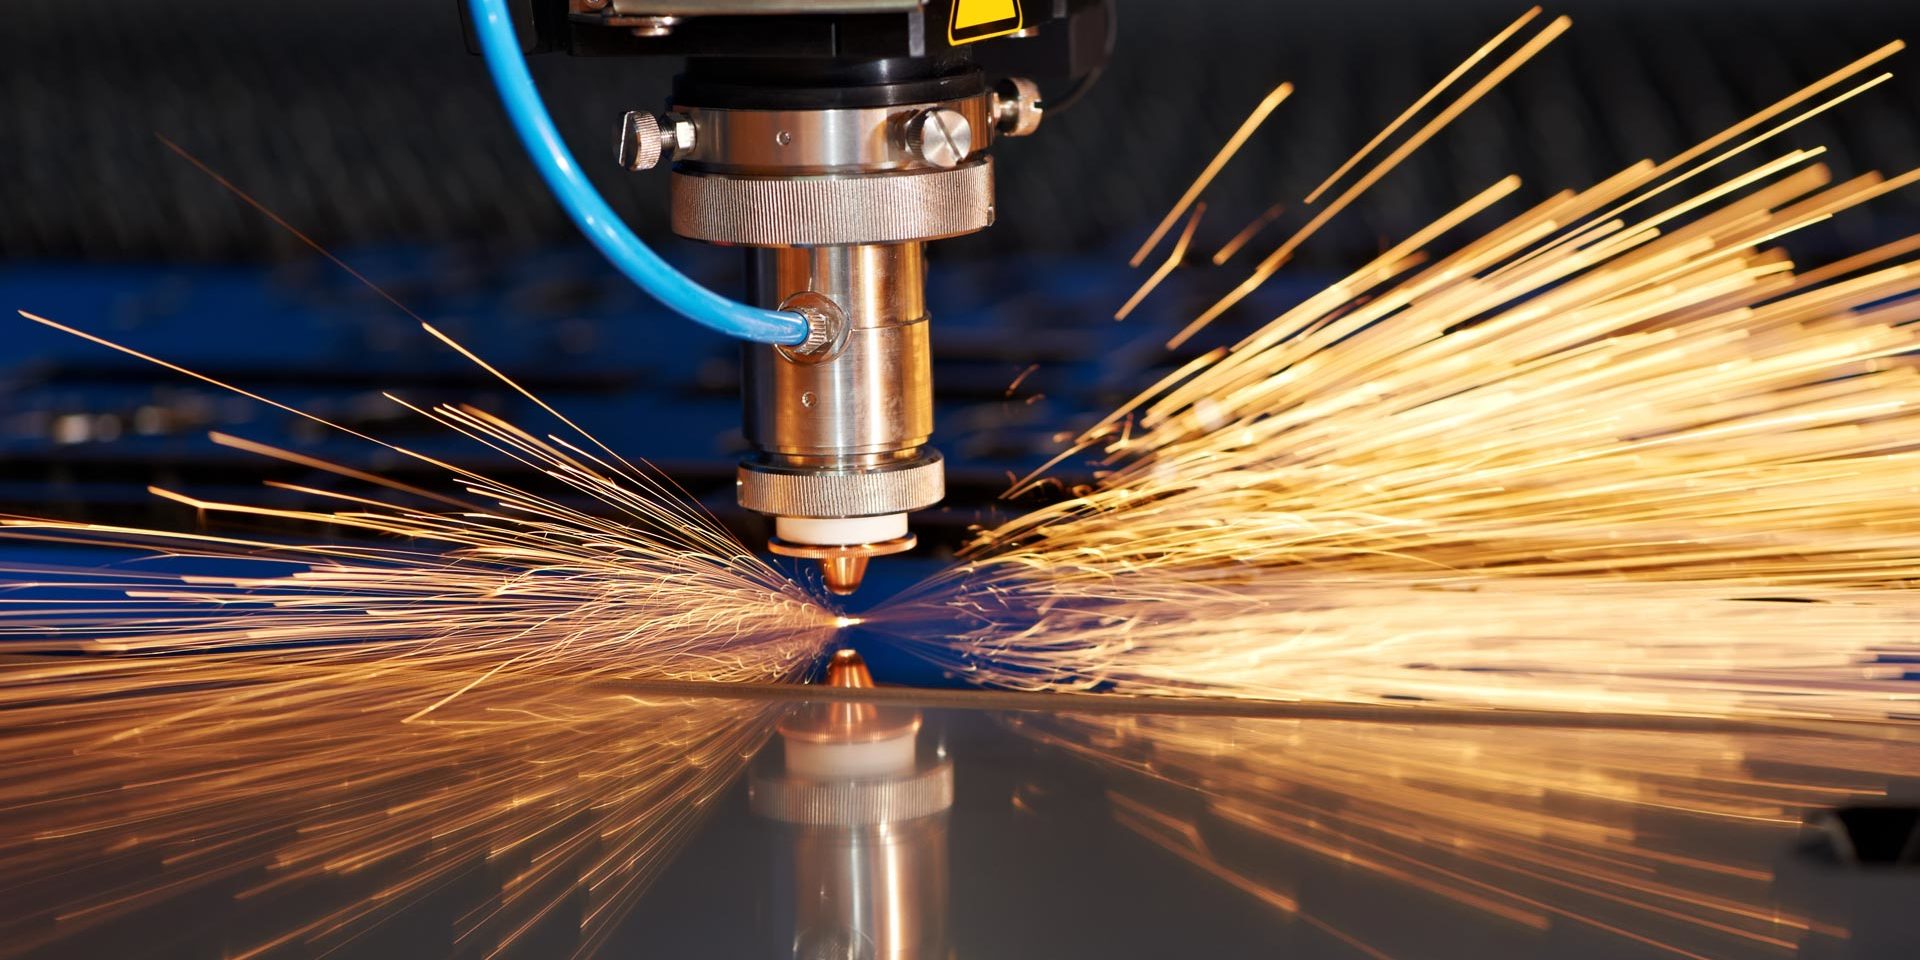 Laser Cutting Services in the PhotoChemical Machining Process at Etch Tech in the UK